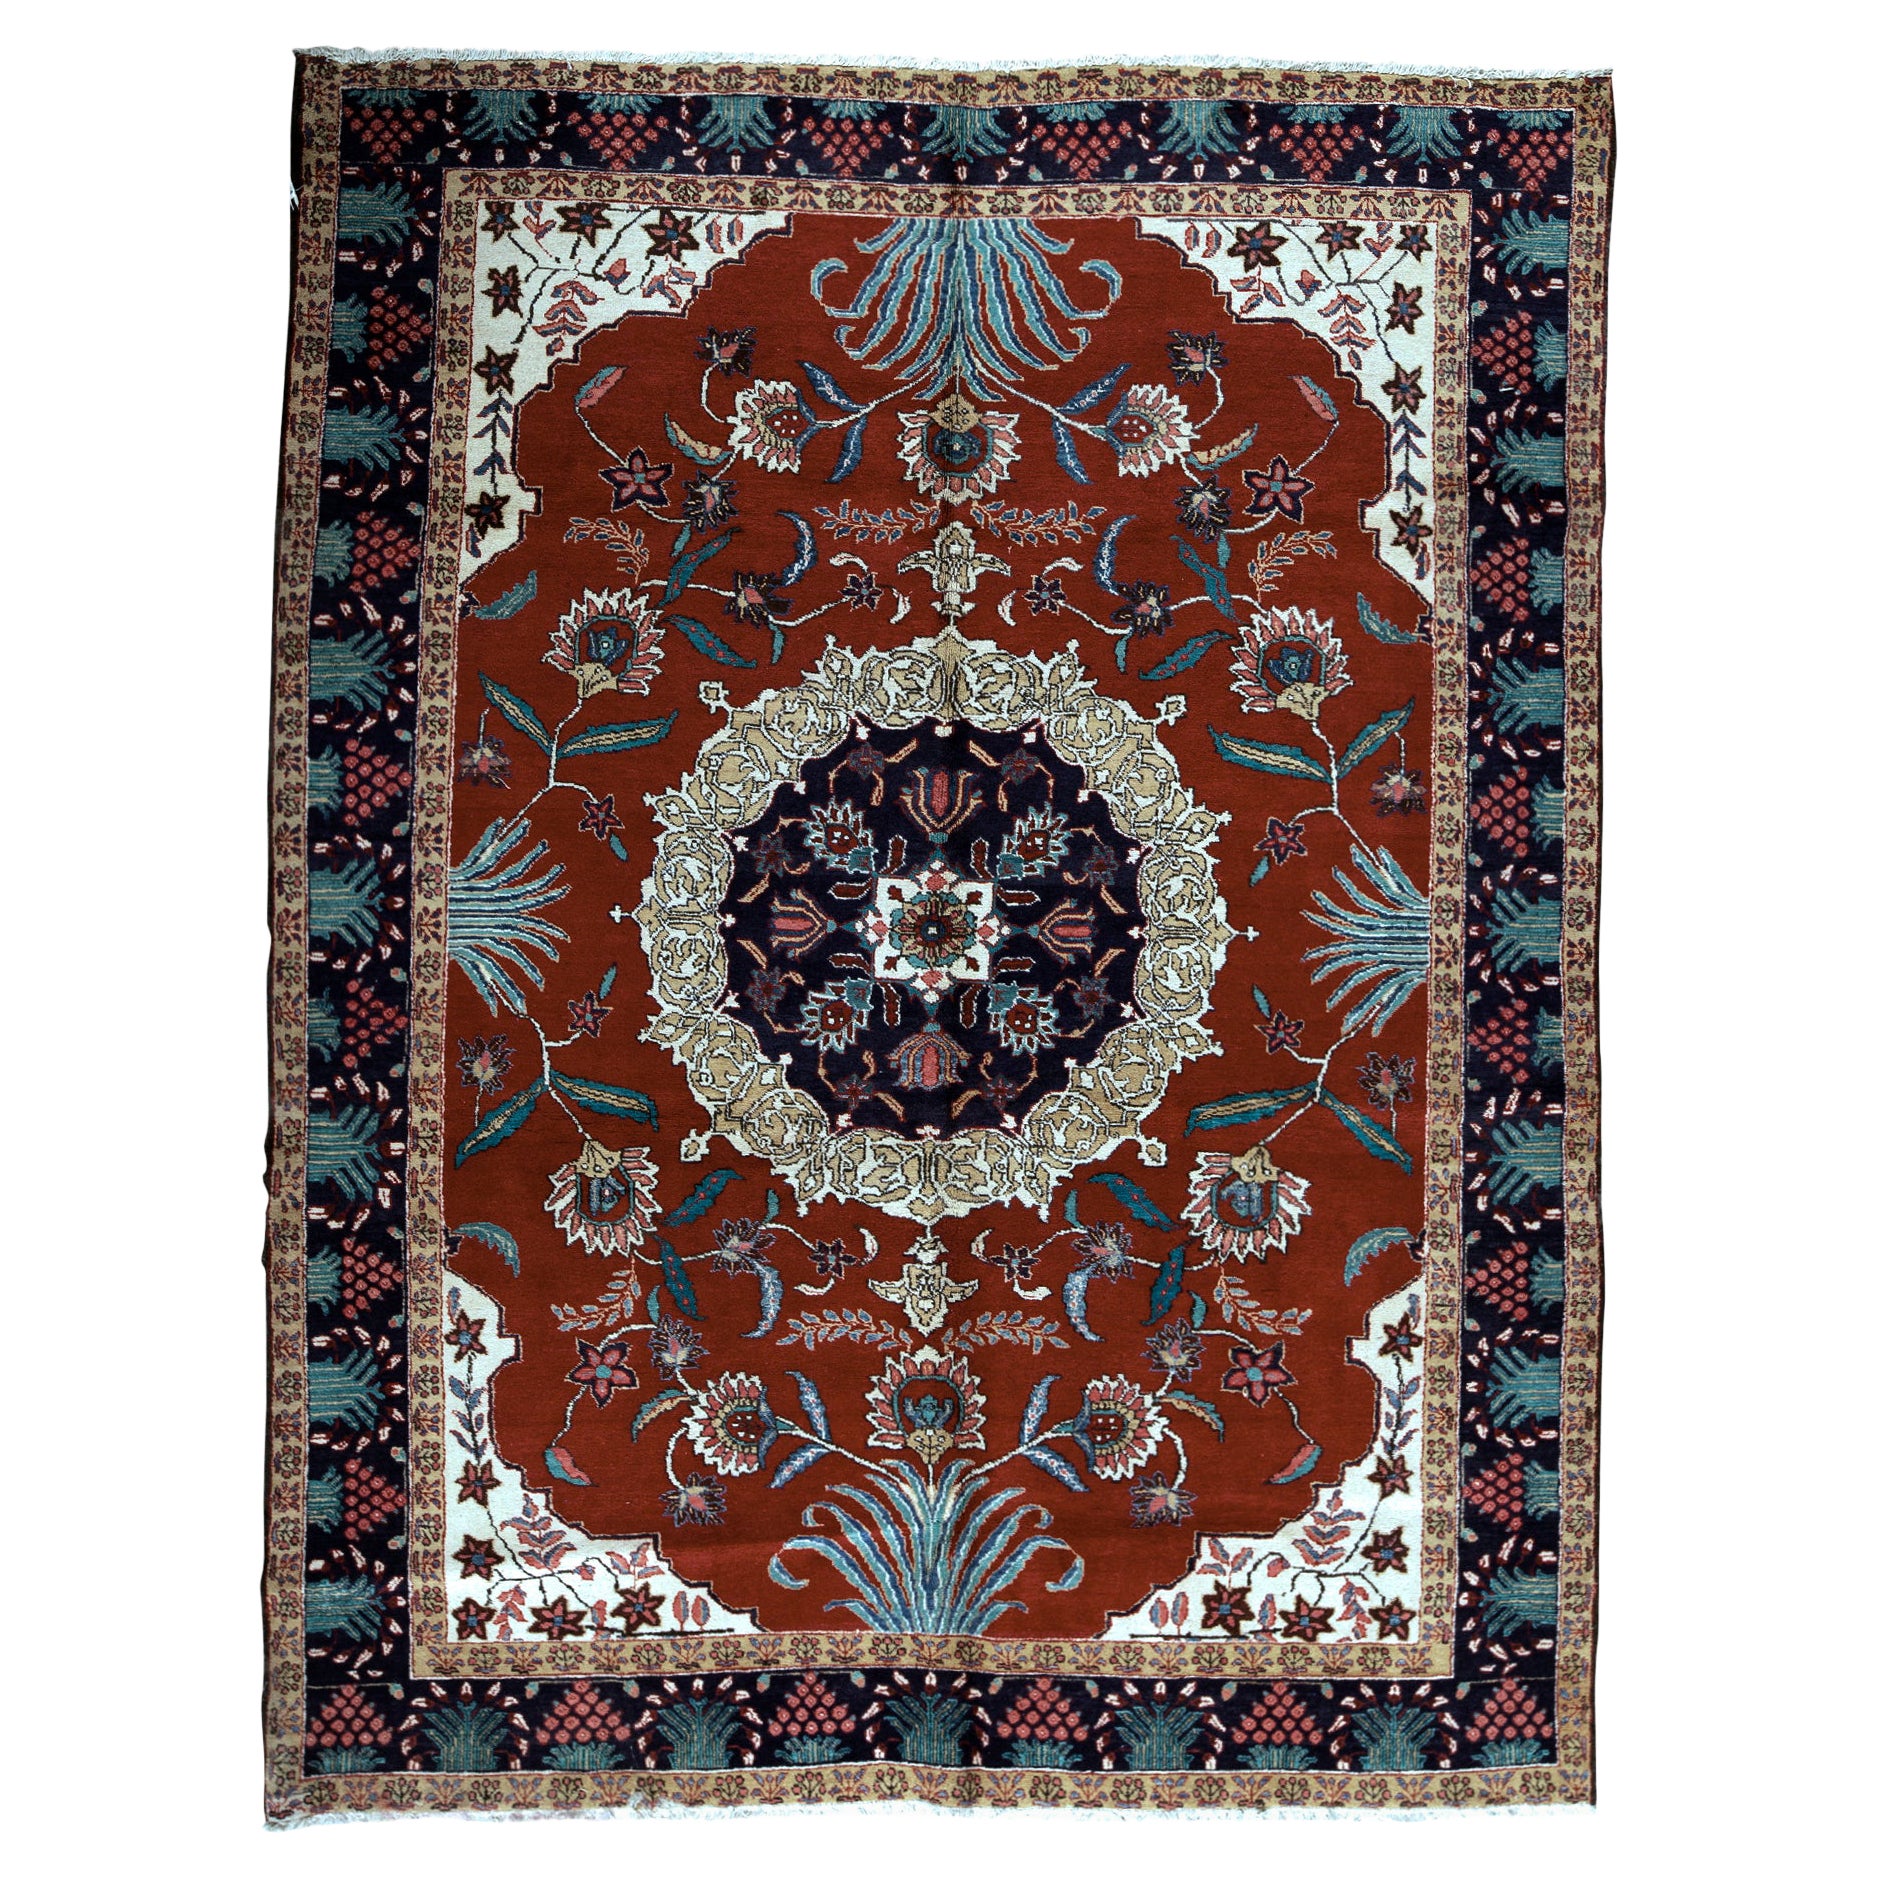   Antique Persian Fine Traditional Handwoven Luxury Wool Red / Navy Rug For Sale